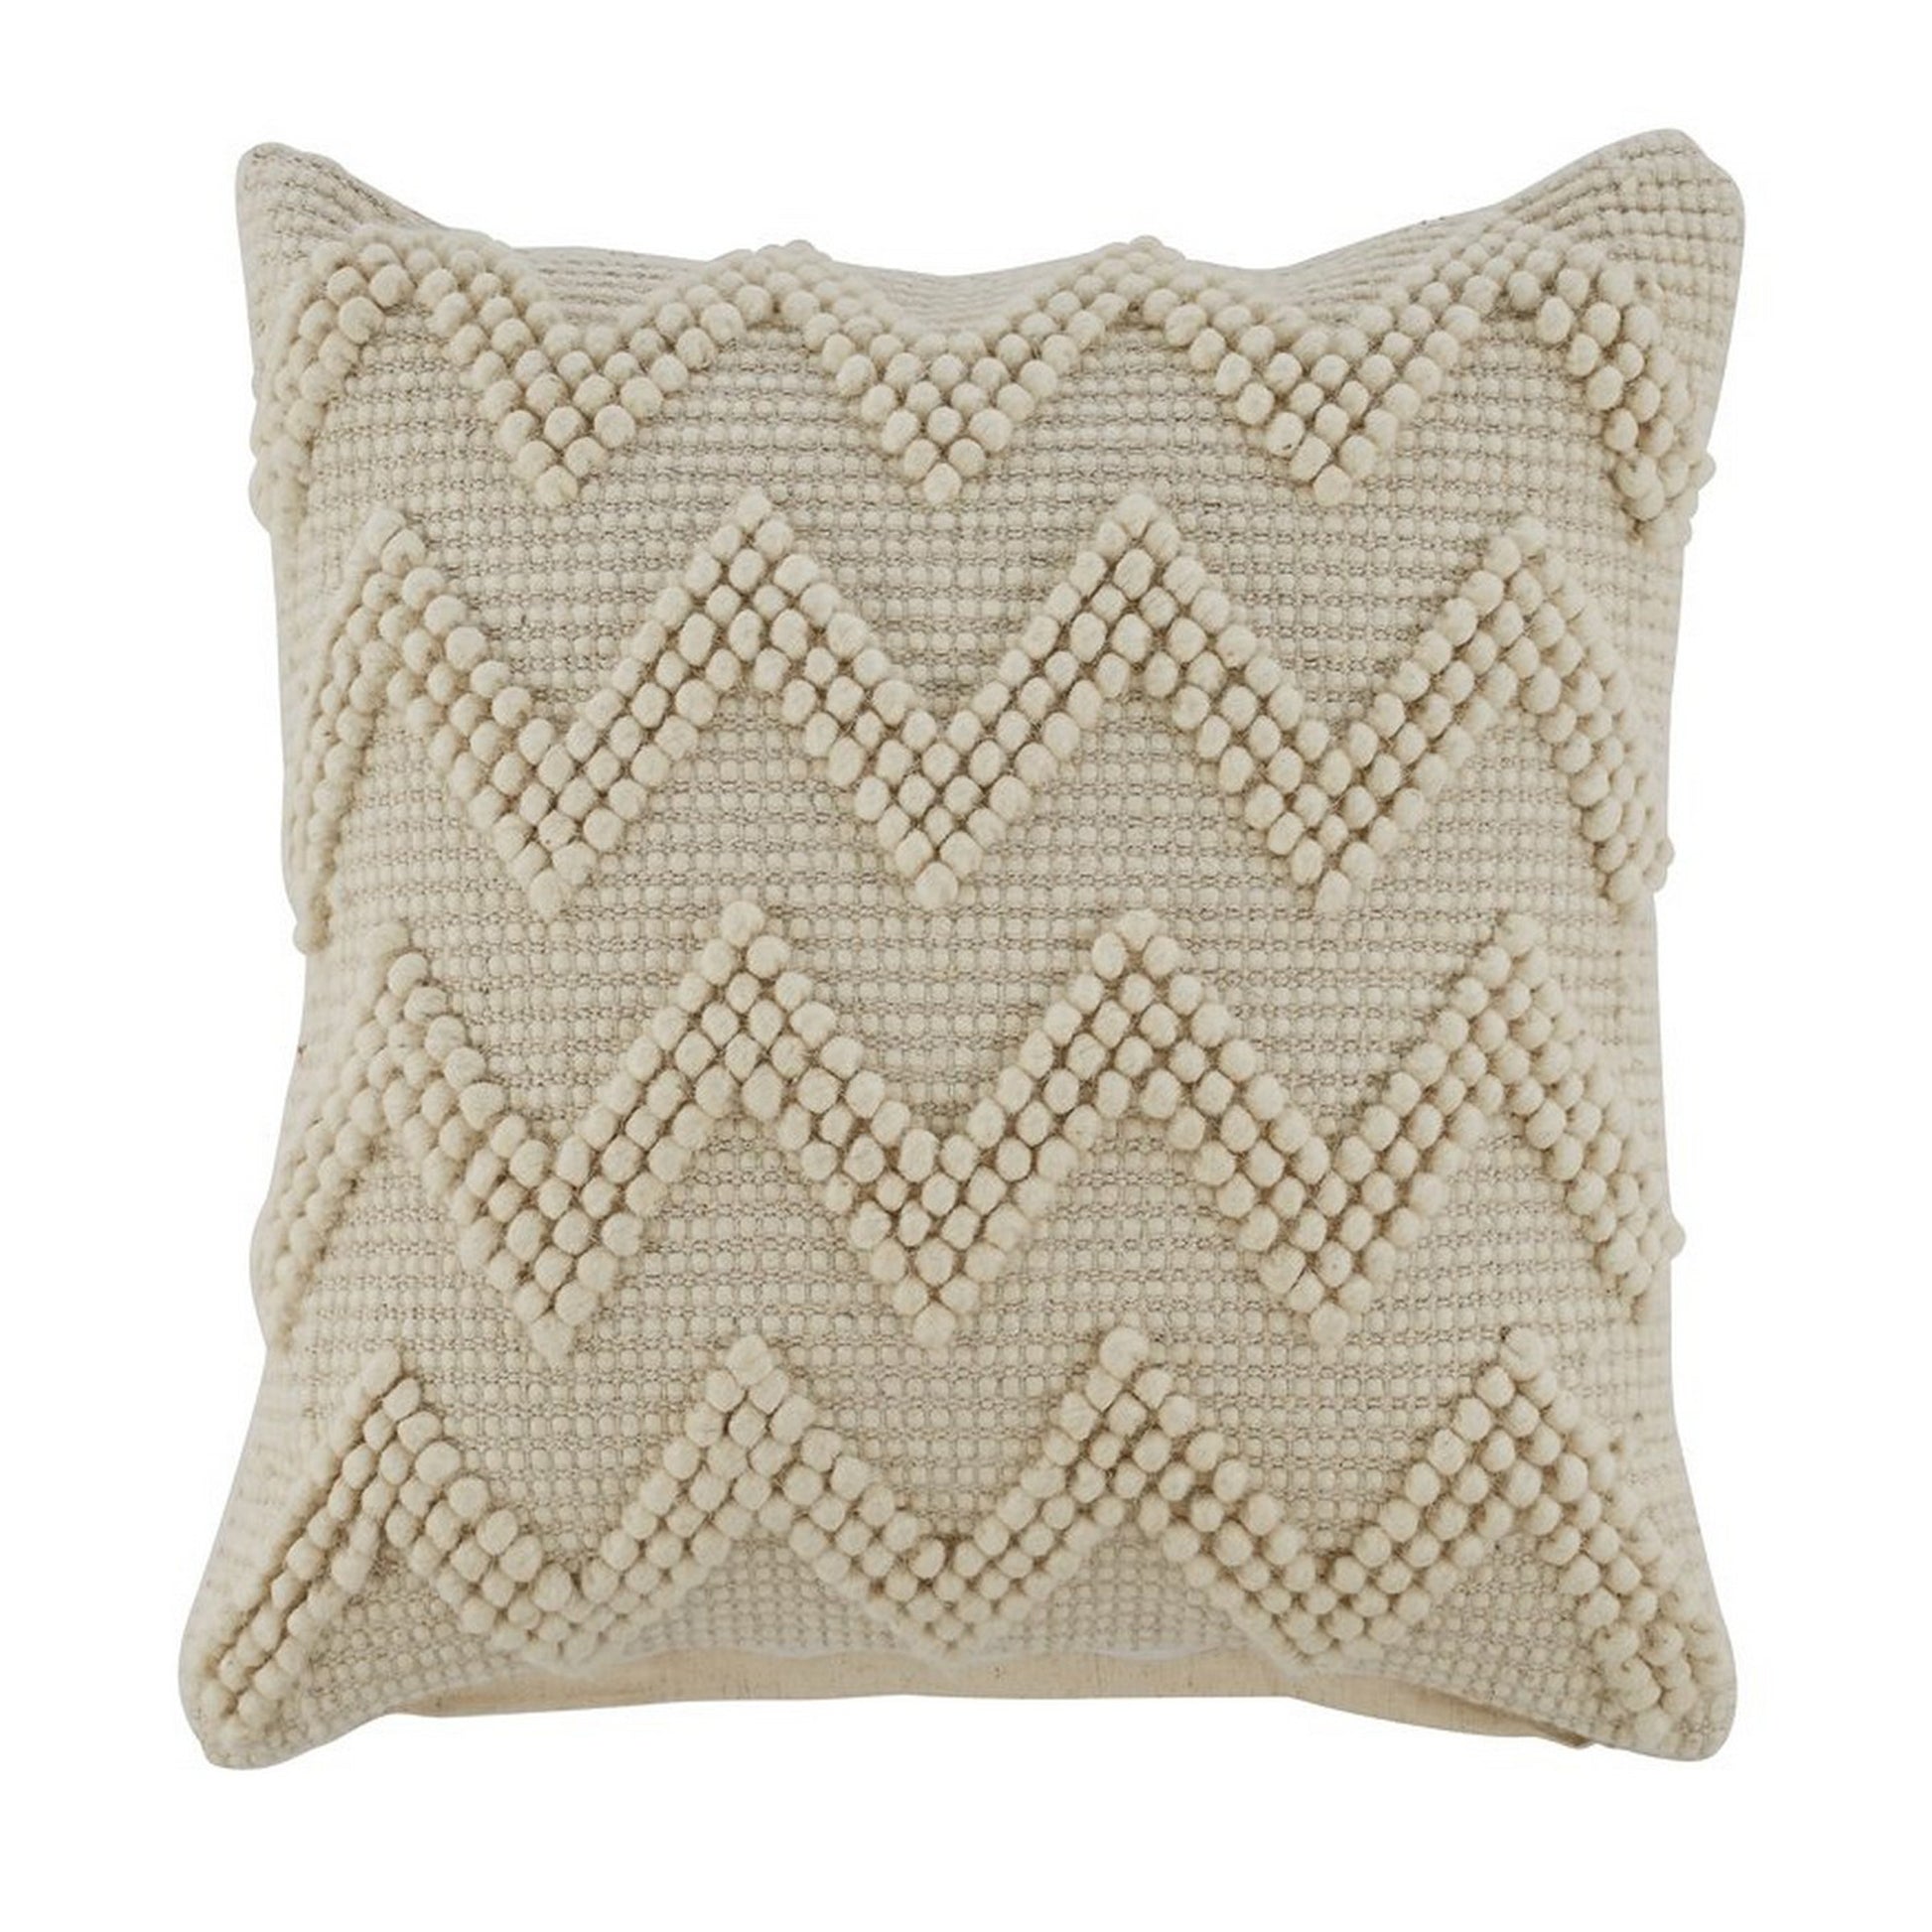 20 X 20 Cotton Accent Pillow With Chevron Beaded